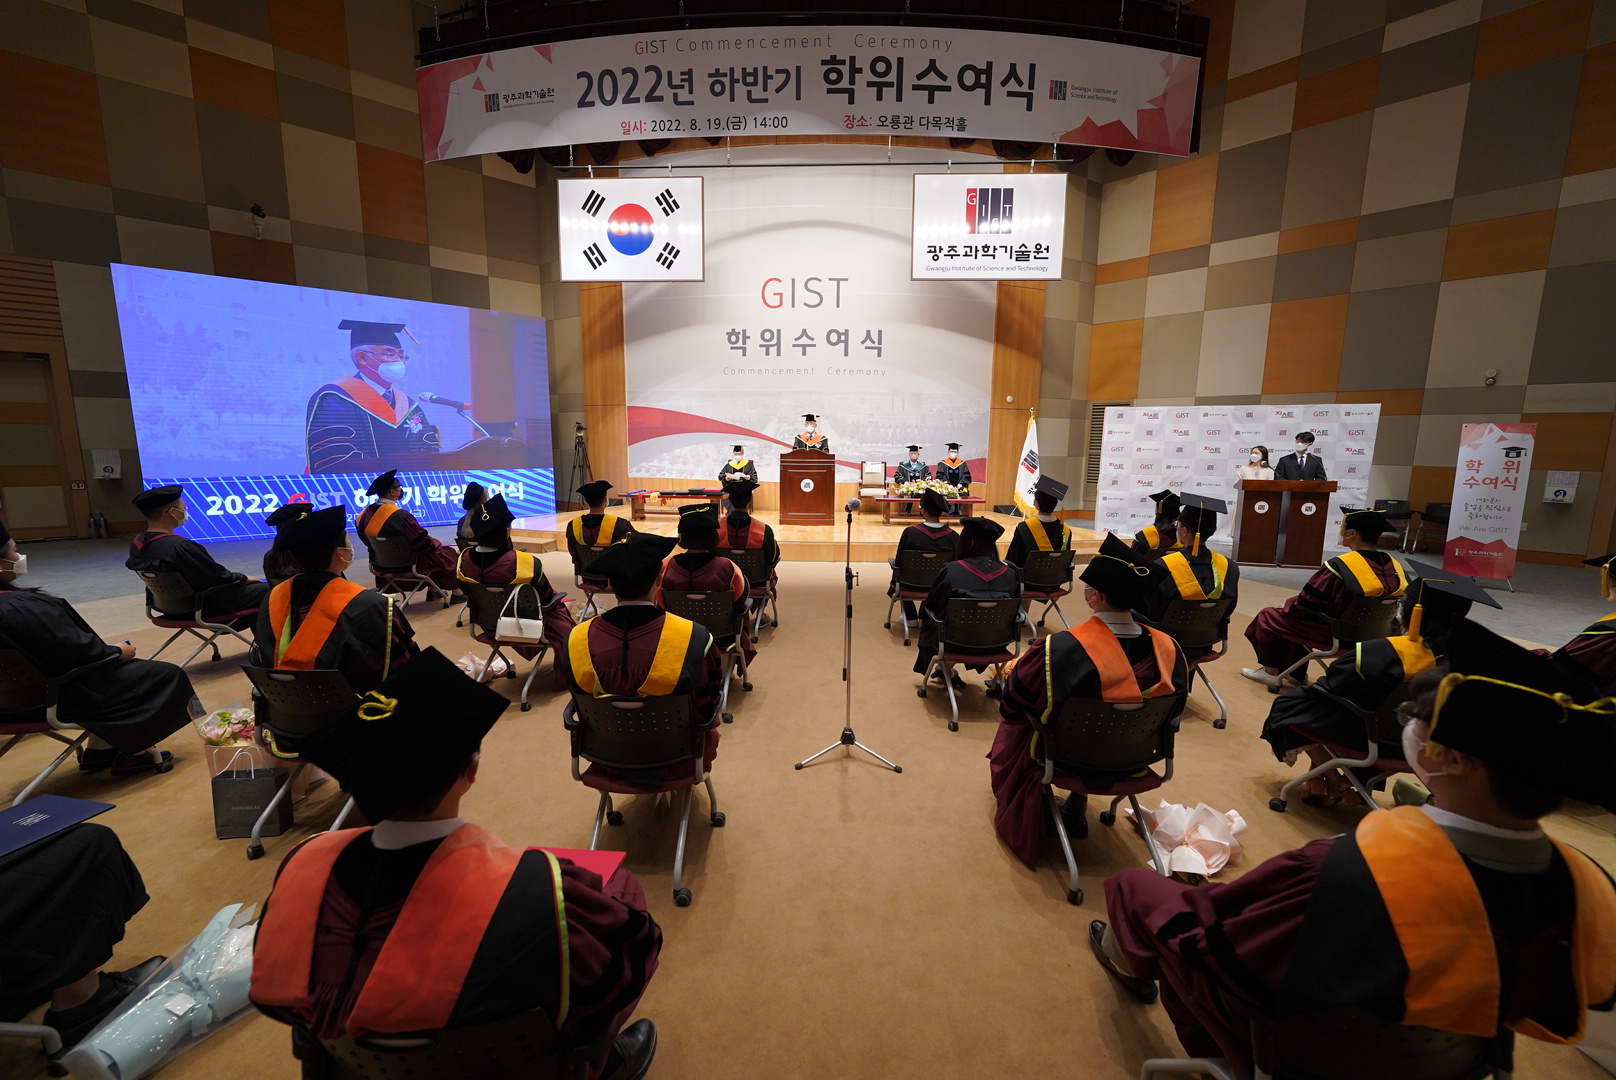 GIST holds degree conferment ceremony for the second half of 2022 이미지